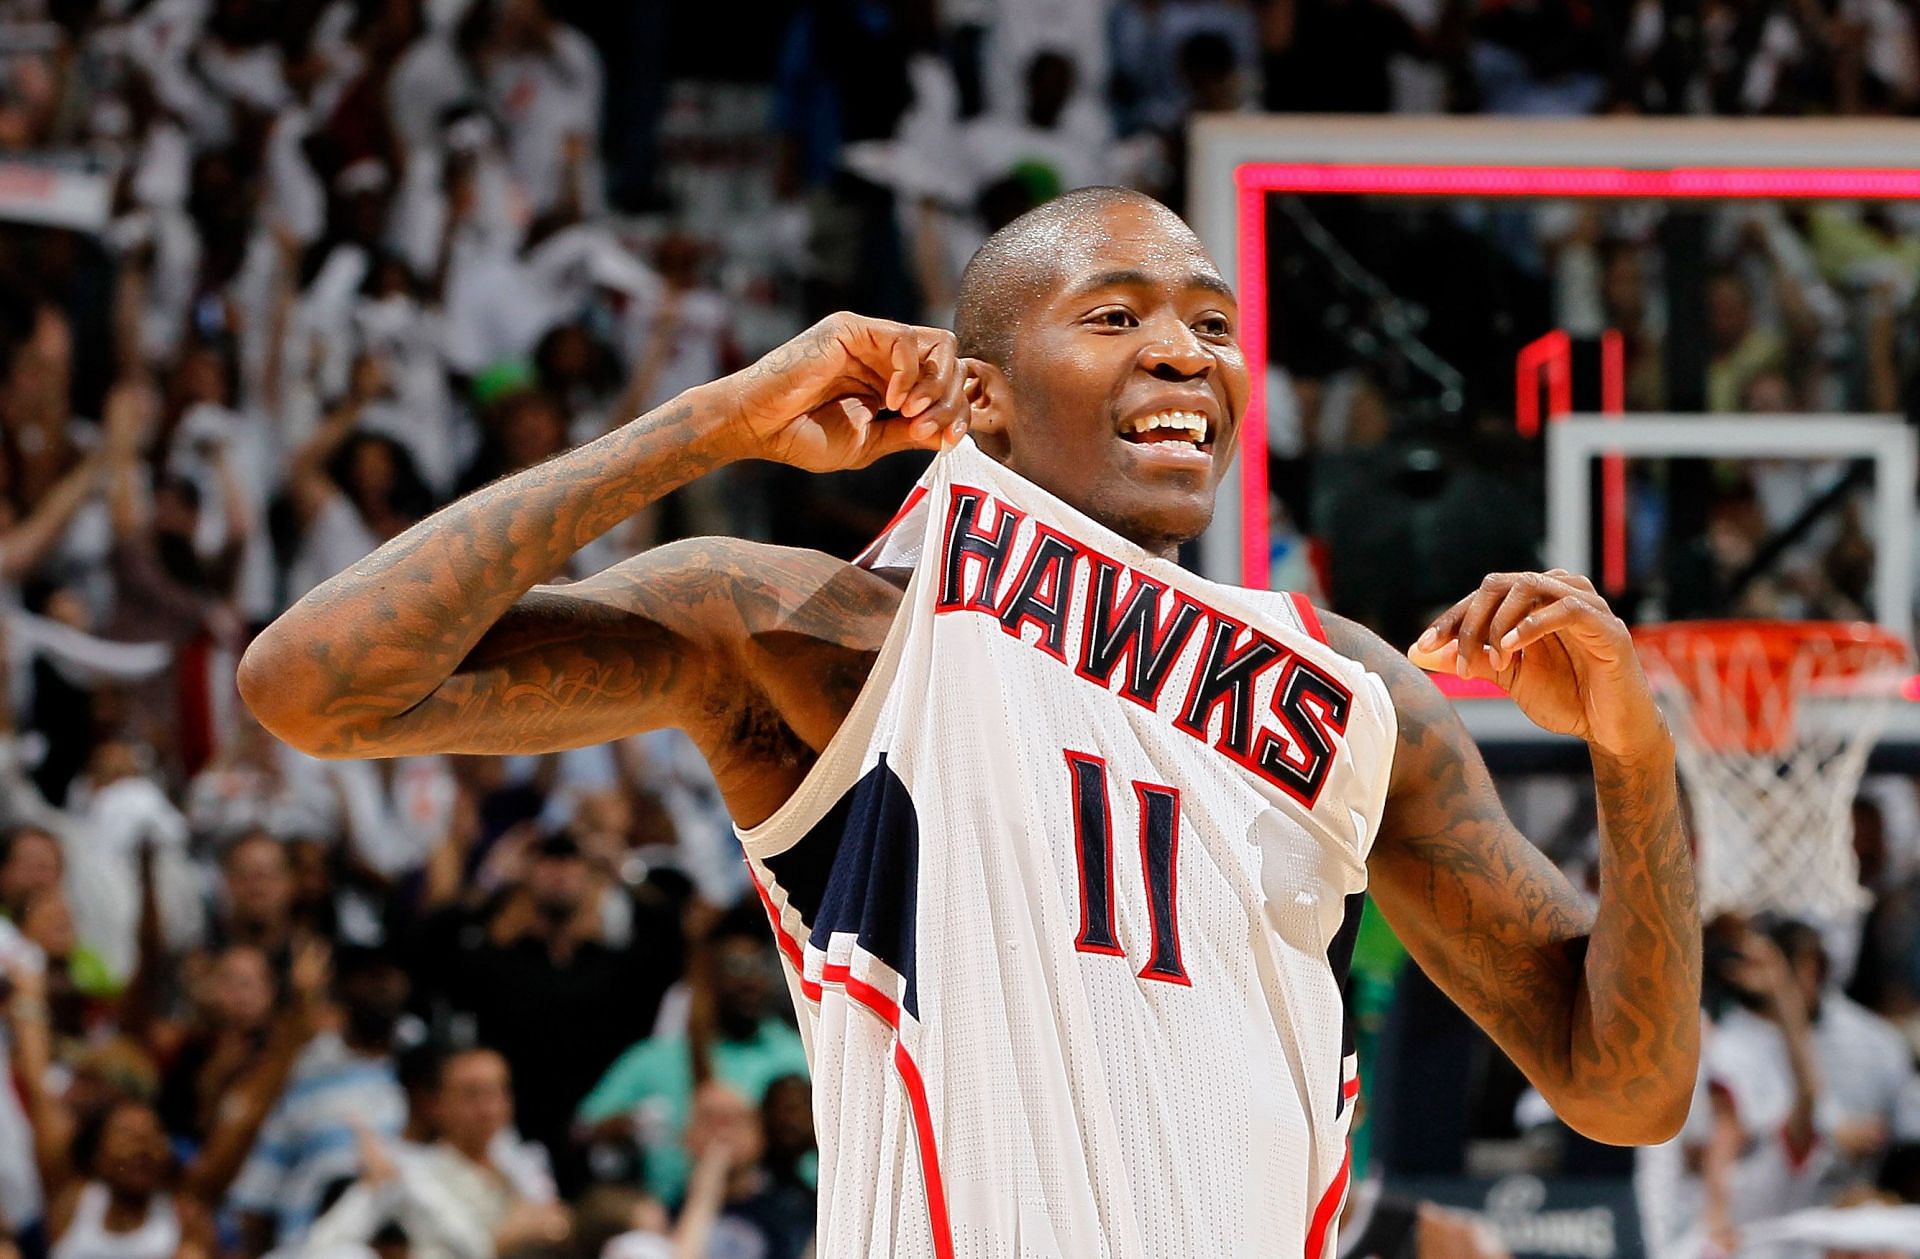 Jamal Crawford during his time with the Atlanta Hawks